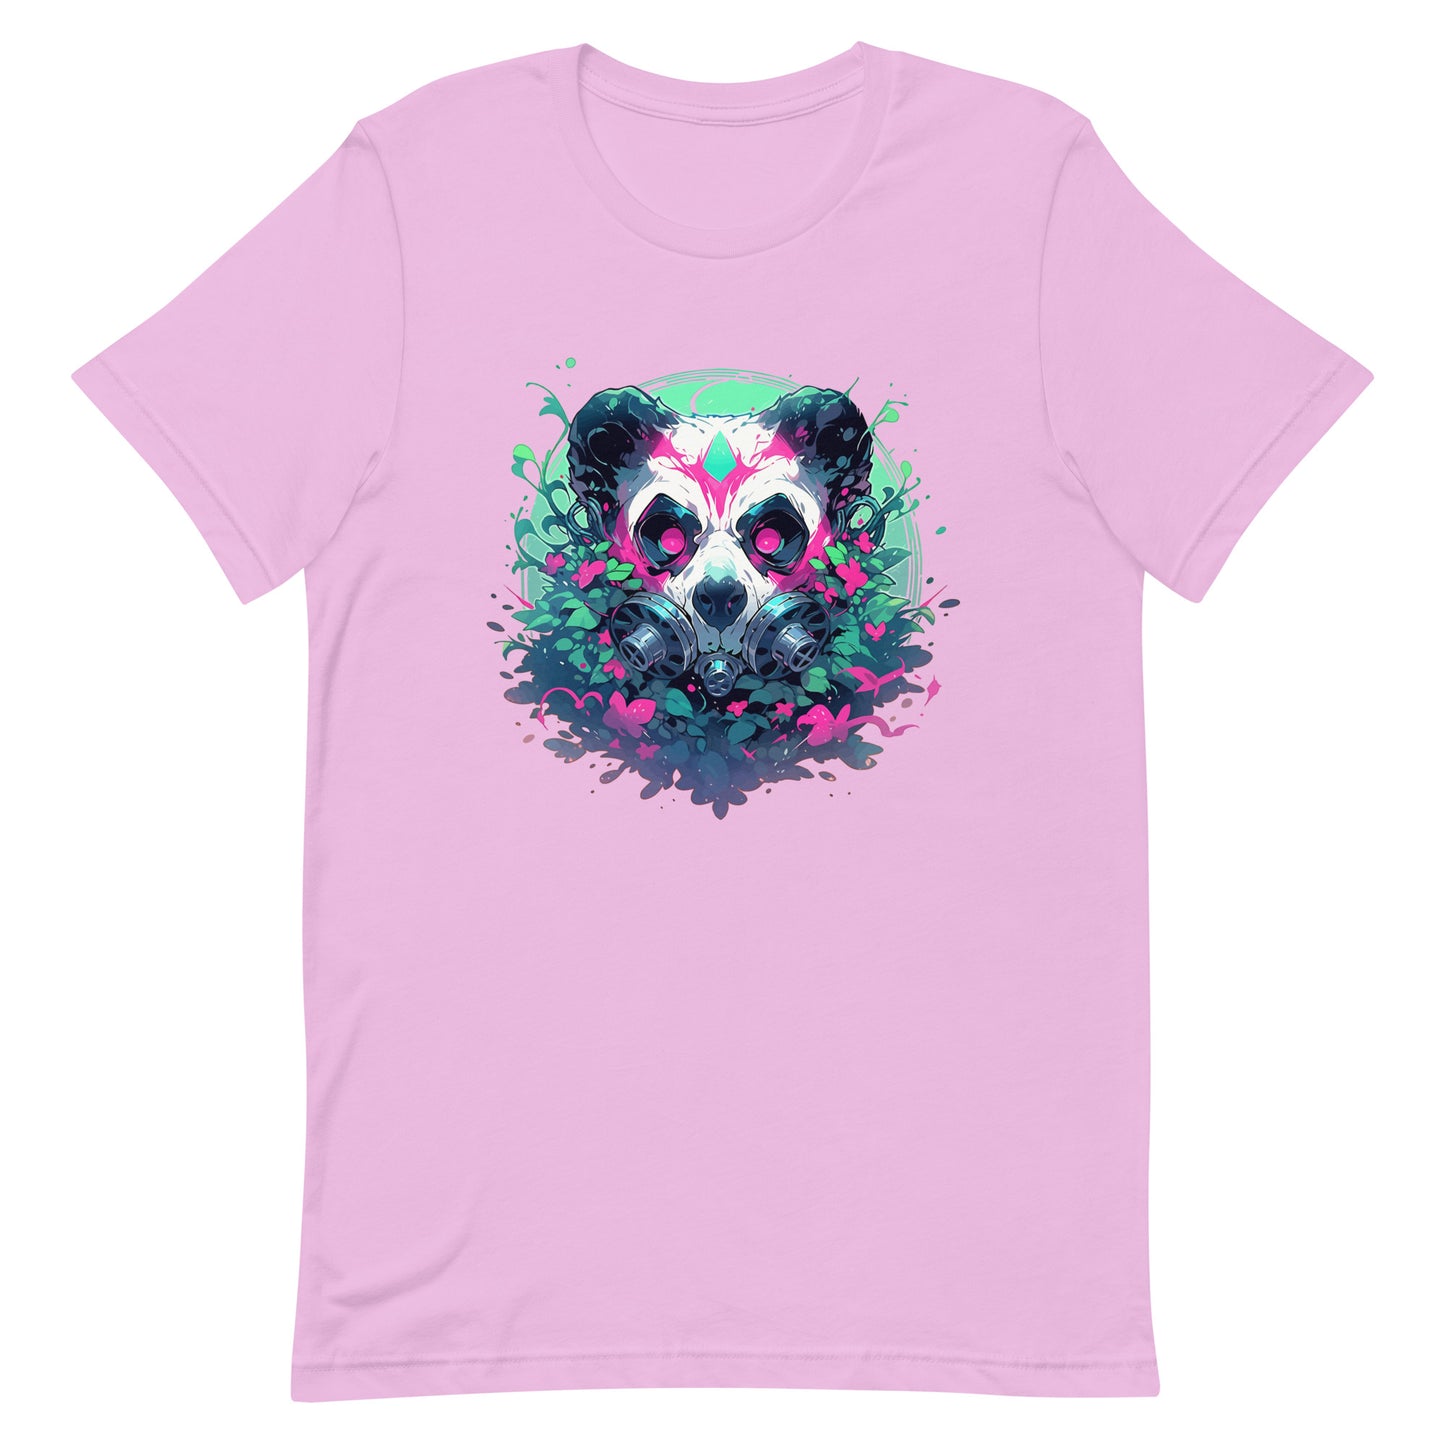 Cool toxic panda, Post-apocalyptic jungle, Wild animal with pink eyes, Bamboo bear in gas mask, Black and white bear - Unisex t-shirt